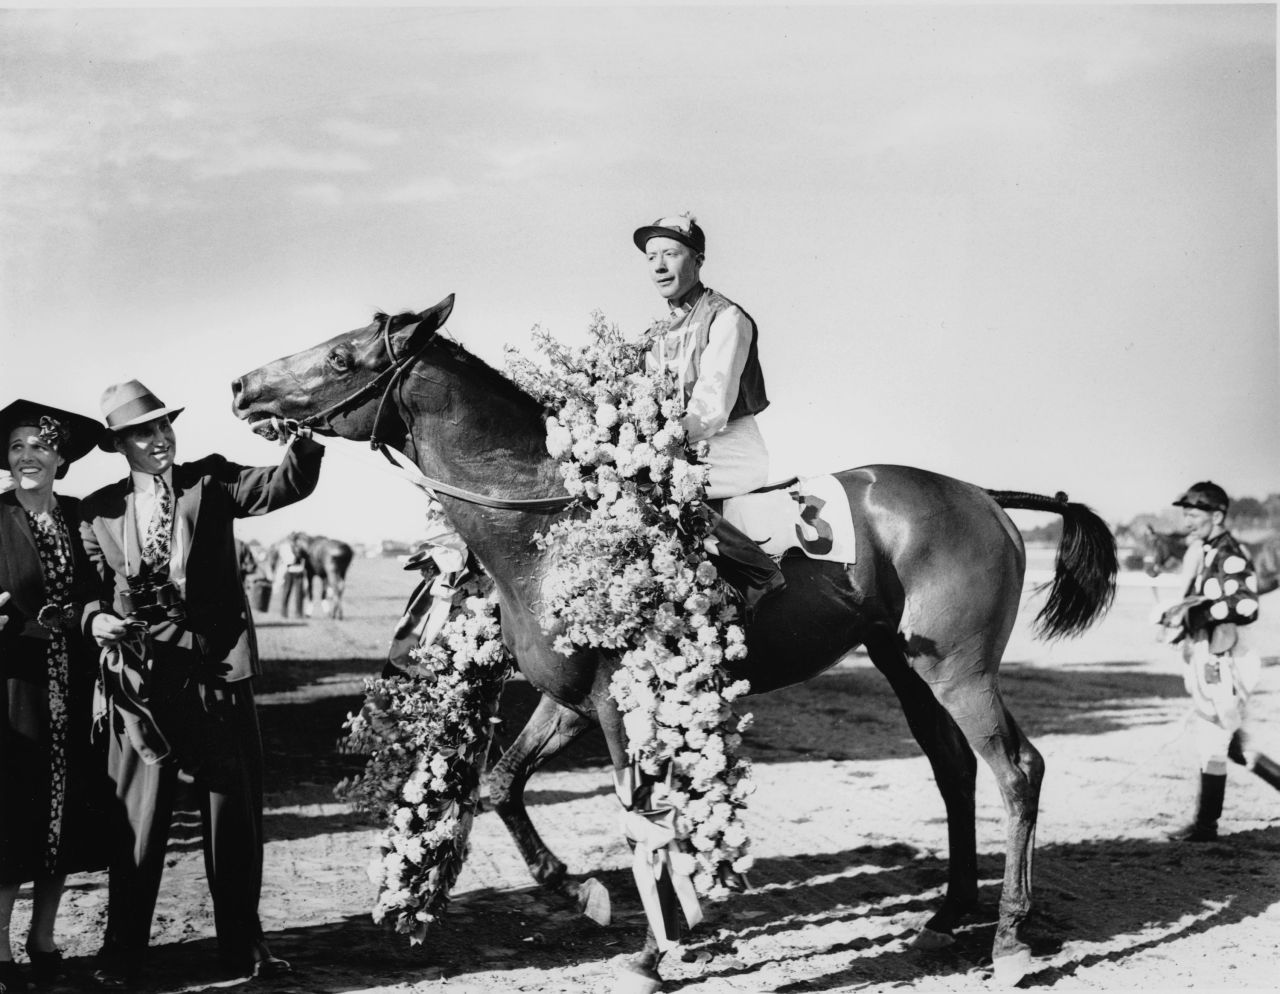 Seabiscuit with jockey Johnny "Red" Pollard after winning the Massachusetts Handicap at Suffolk Downs on Aug. 7, 1937. (AP)